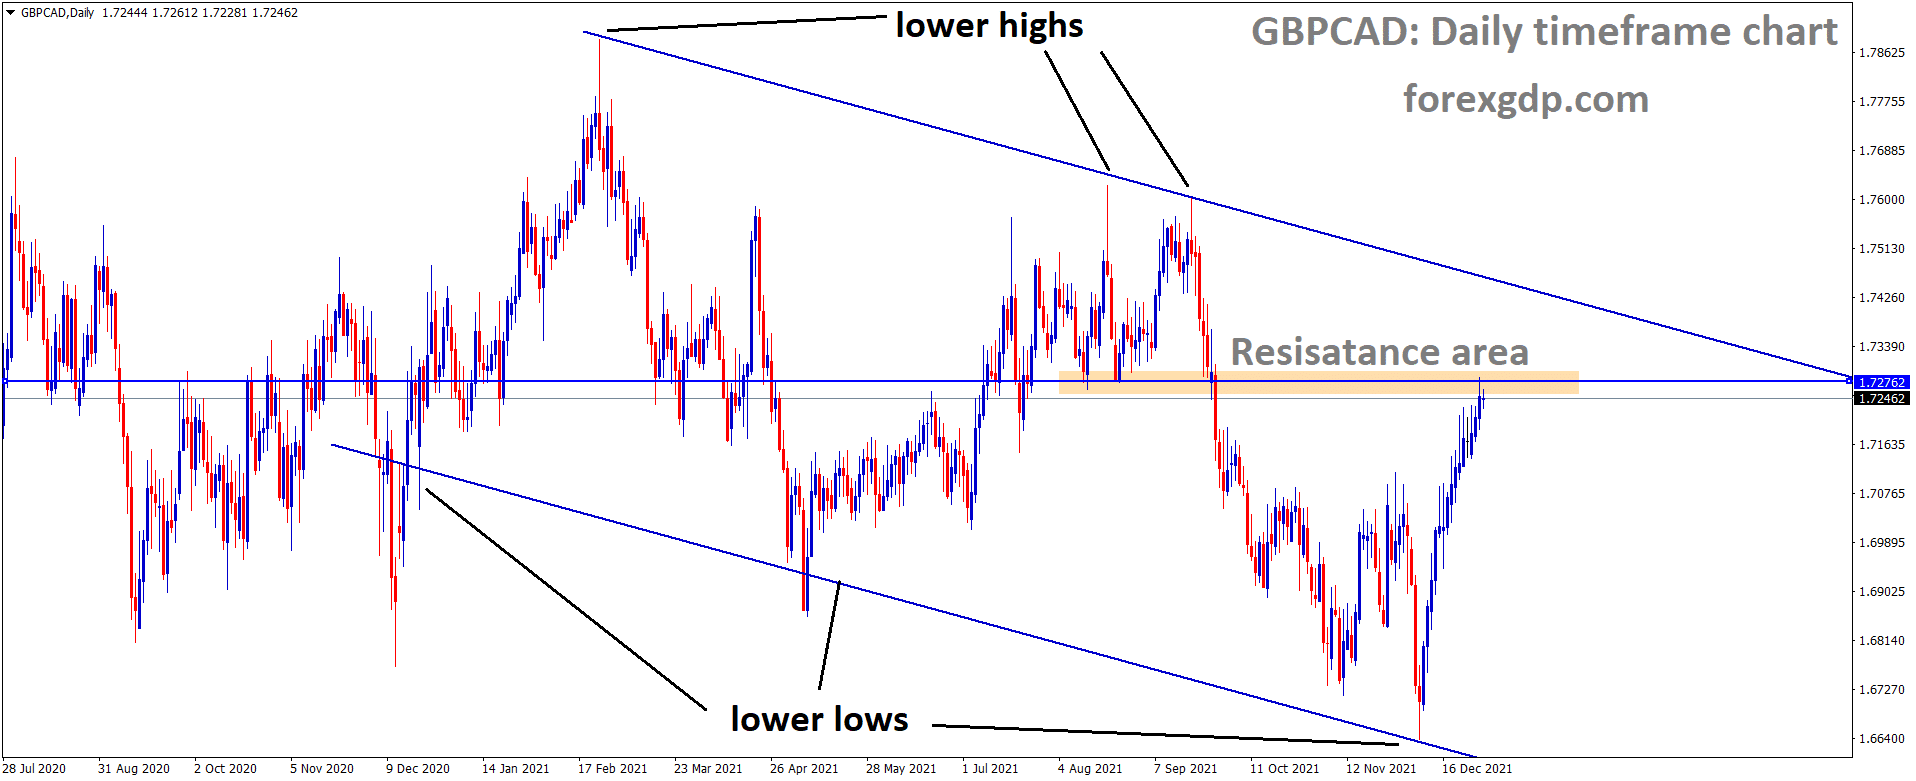 GBPCAD is moving in the Descending channel and the market has reached the Horizontal resistance area of the channel